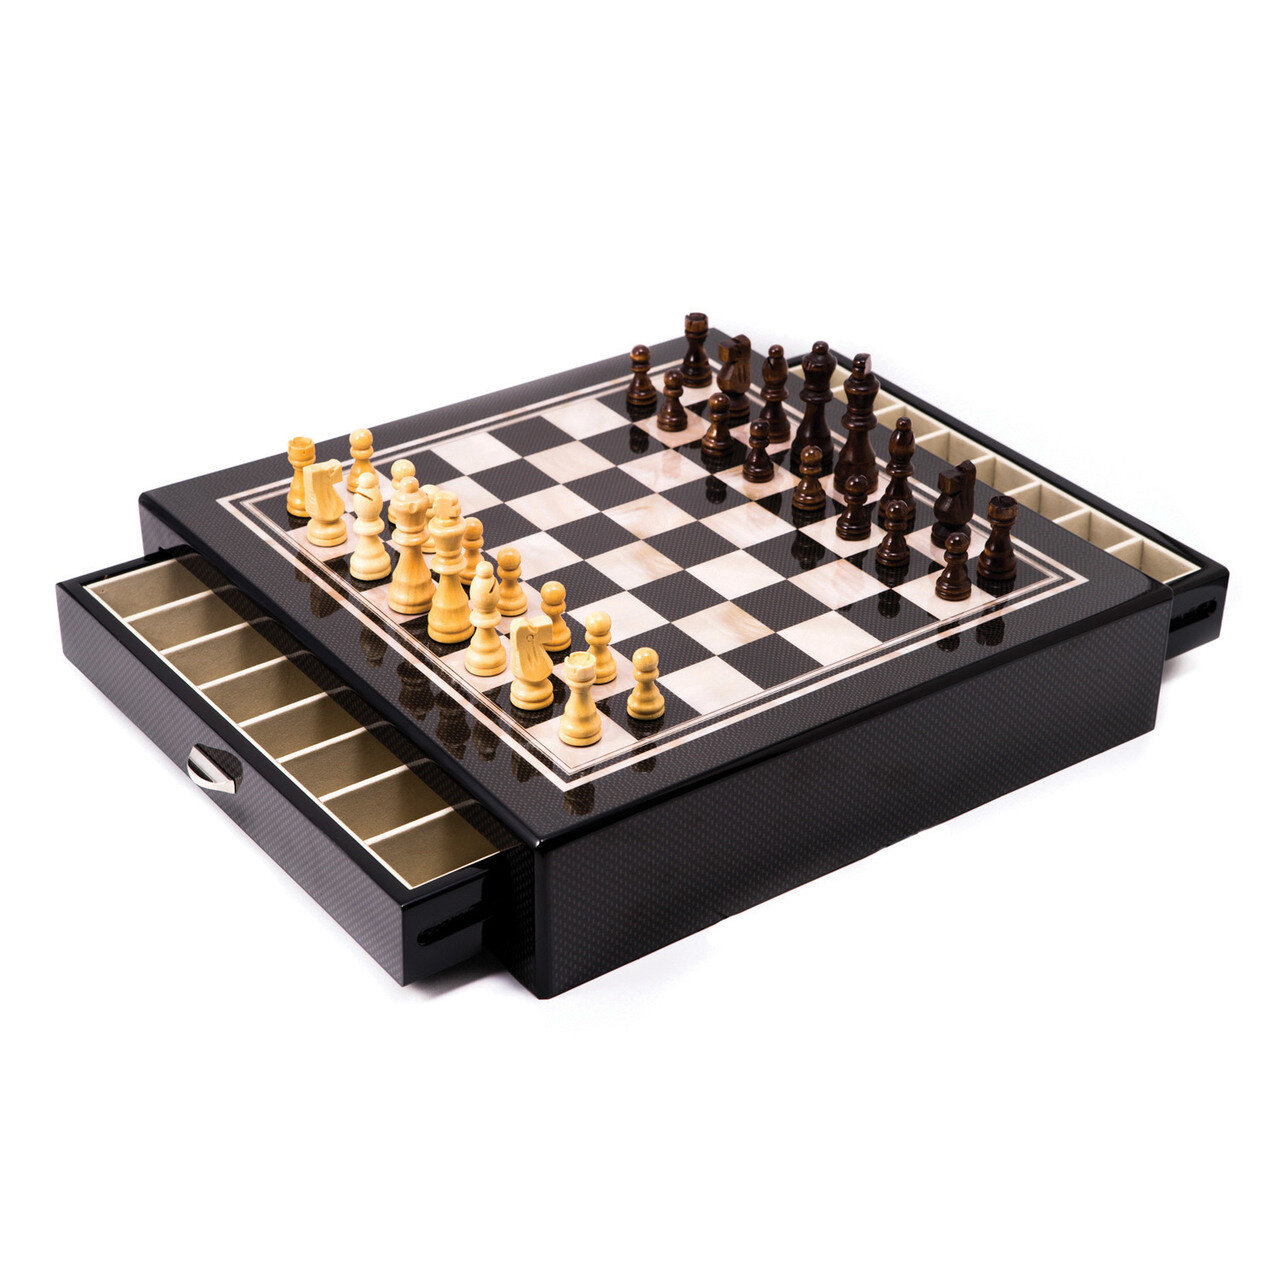 Carbon Fiber & Mother of Pearl Design Chess Set with Accessory Drawers GM13393